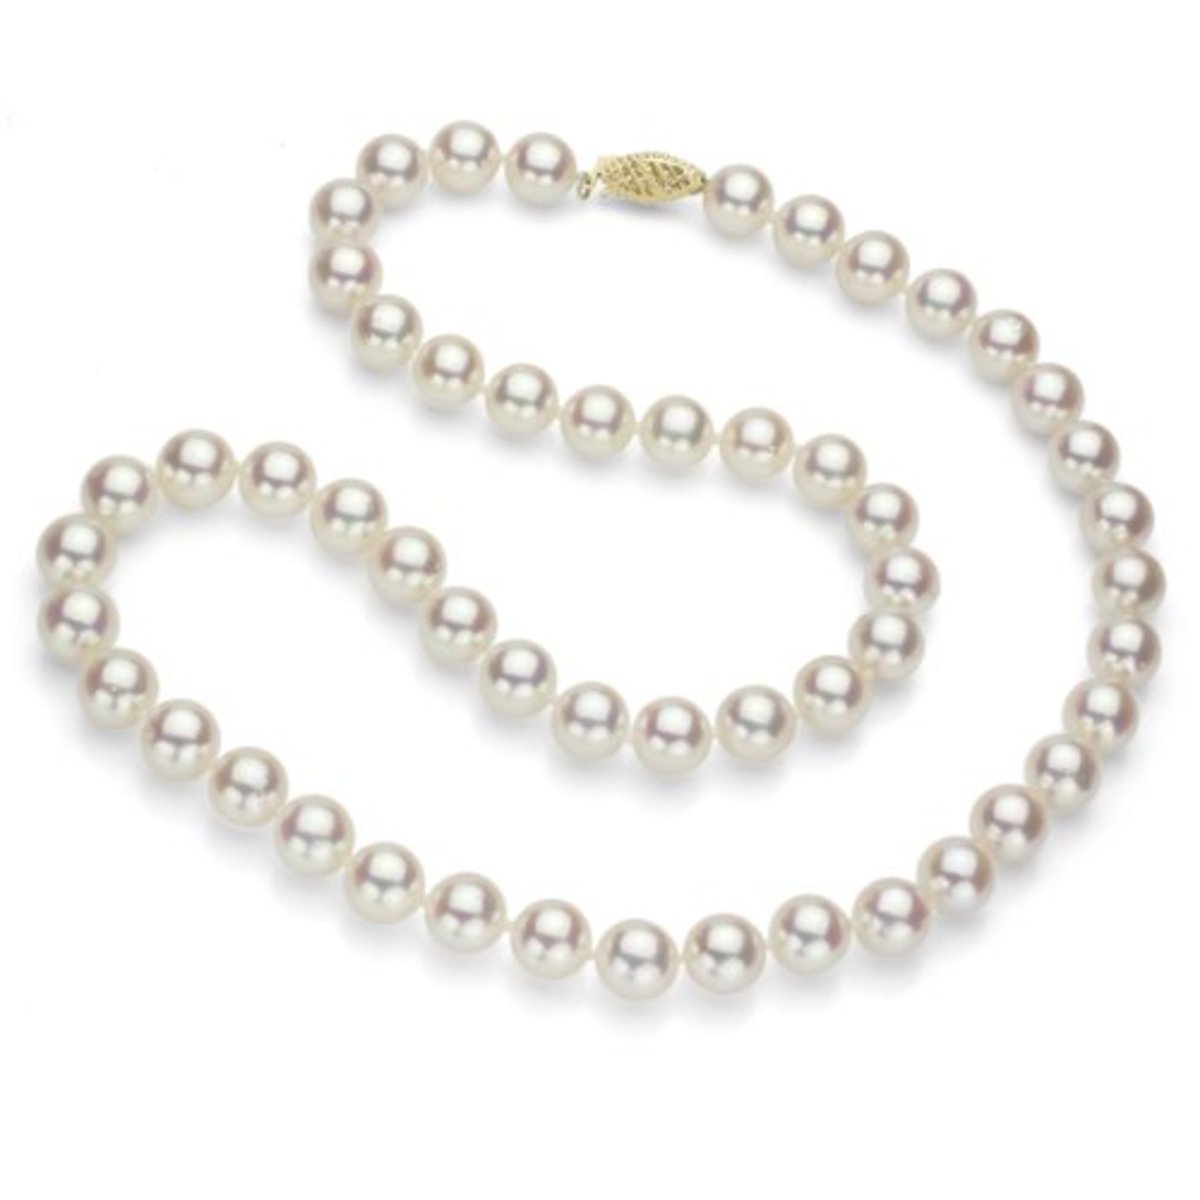 Japanese Saltwater Akoya Pearl Necklace